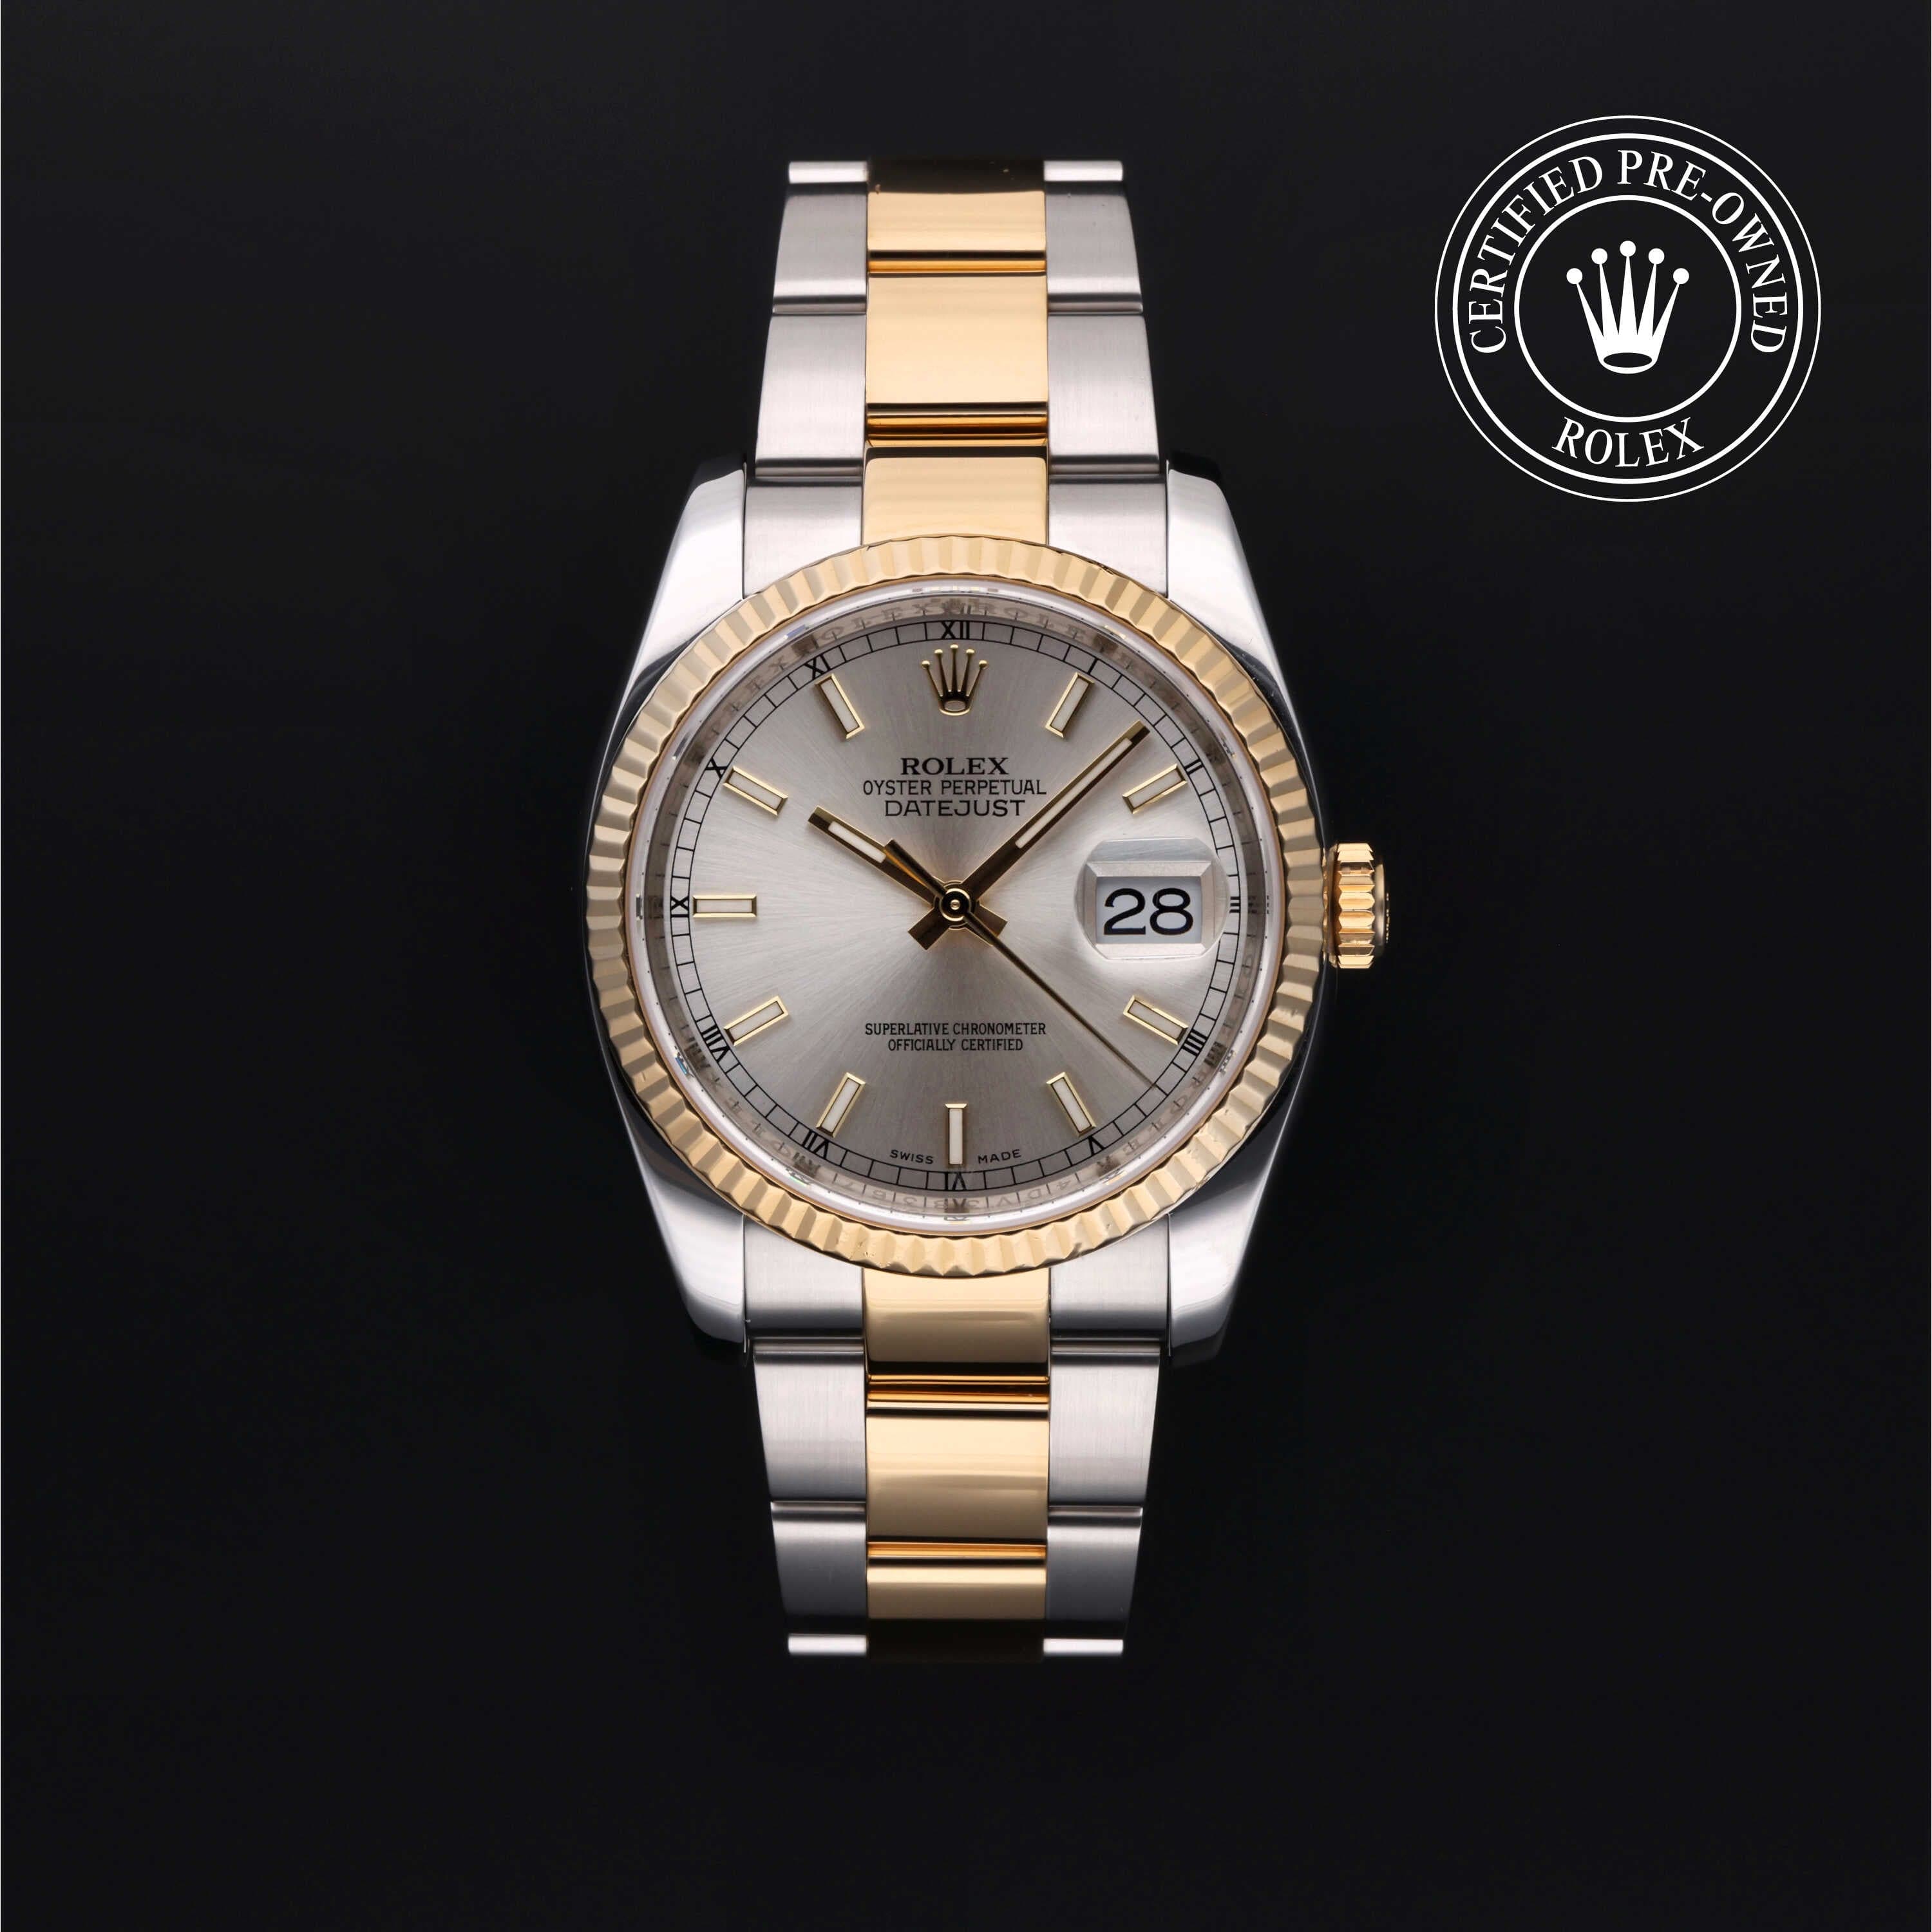 Rolex Certified Pre-Owned Datejust in Oyster, 36 mm, Stainless steel and yellow gold watch